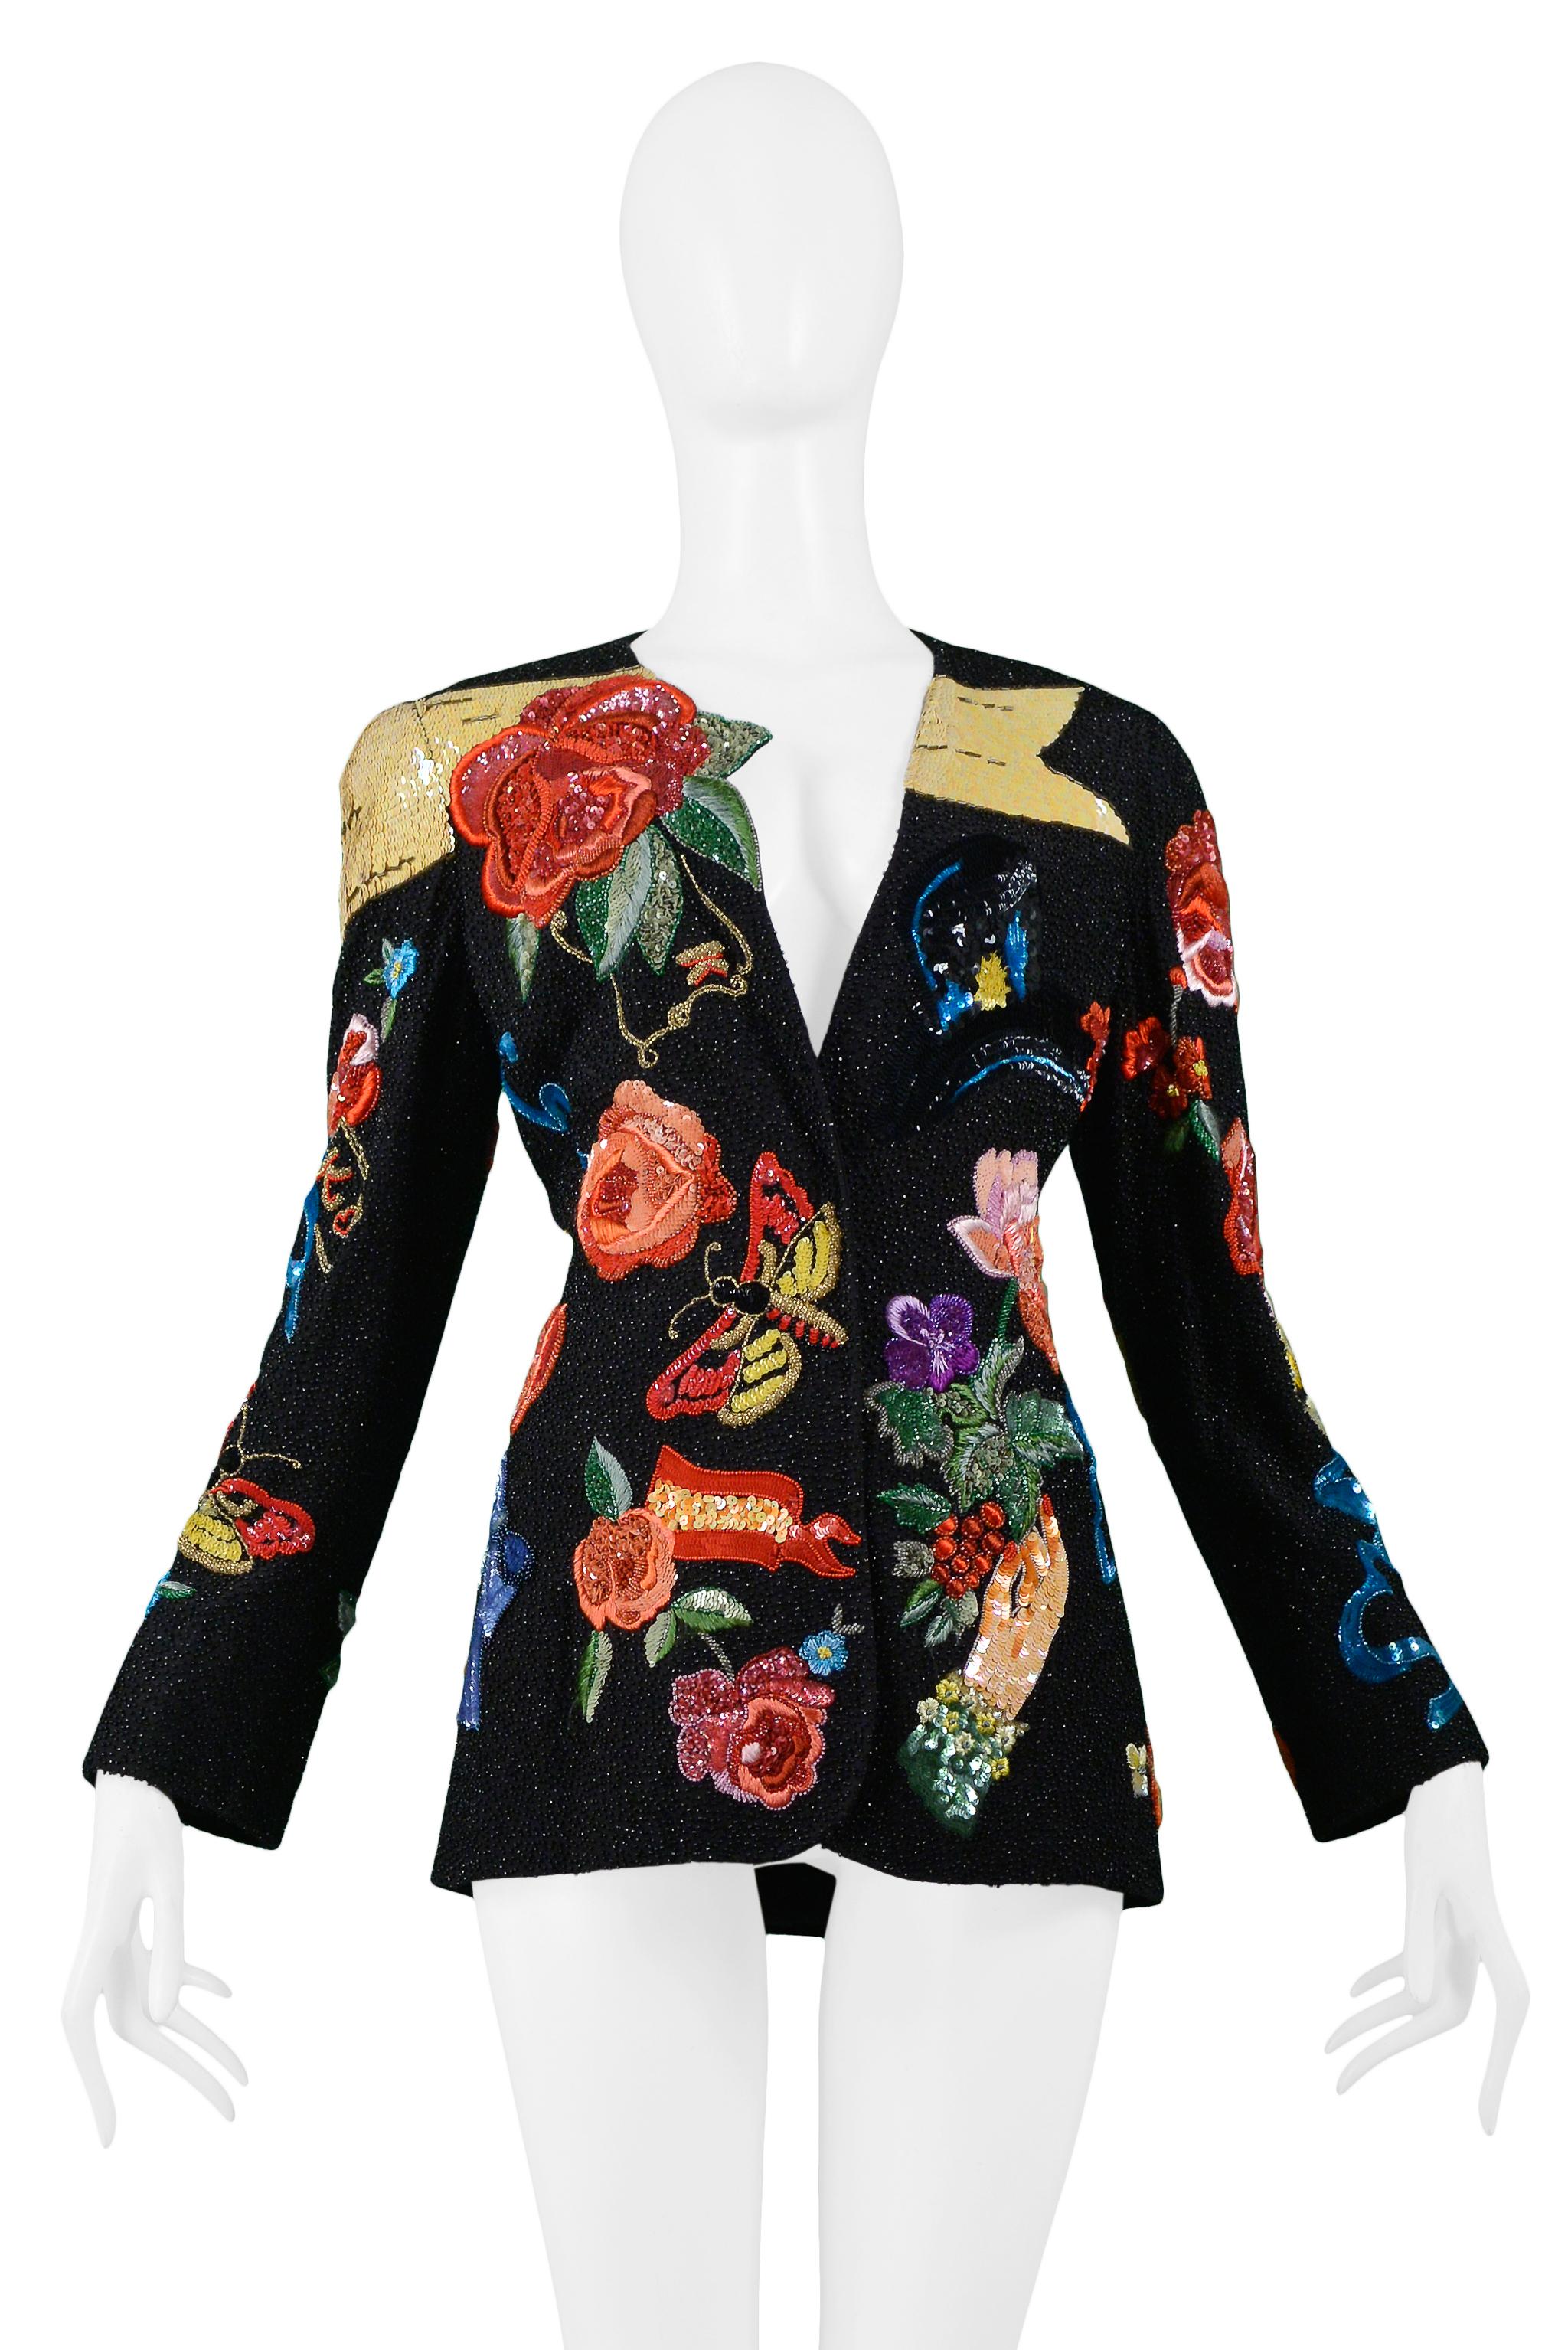 Vintage Krizia 100% silk black heavily beaded and embroidered jacket with bows, roses, butterflies, hand, and portrait. The jacket features a slim fit, deep V neck, black acetate lining, and three hidden snap closure. From the 1991 runway